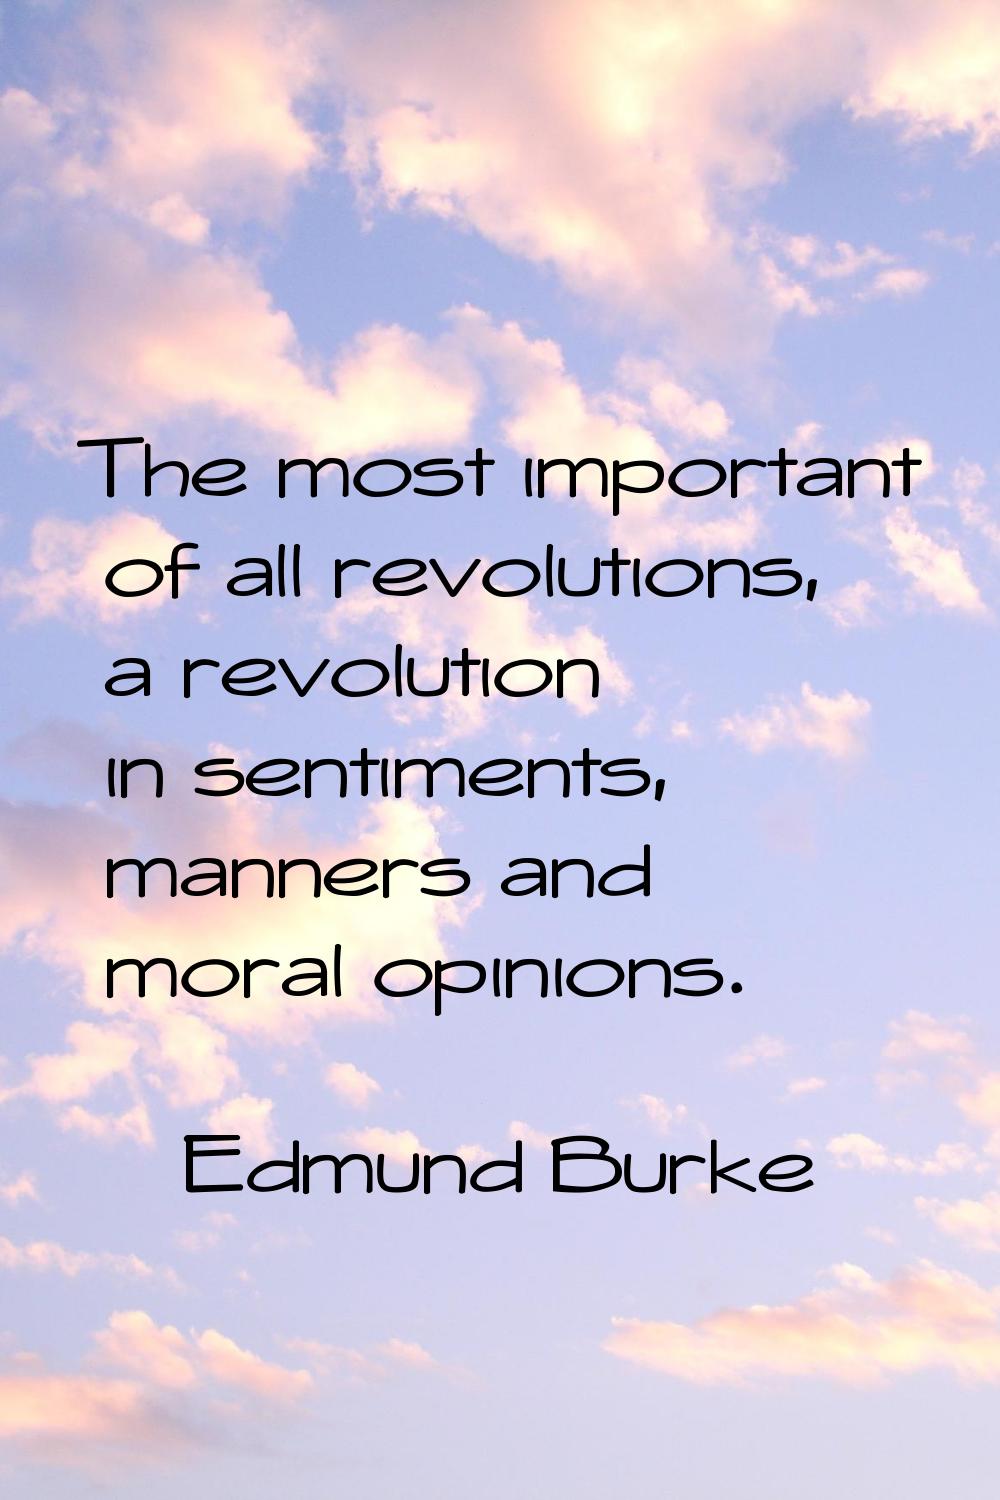 The most important of all revolutions, a revolution in sentiments, manners and moral opinions.